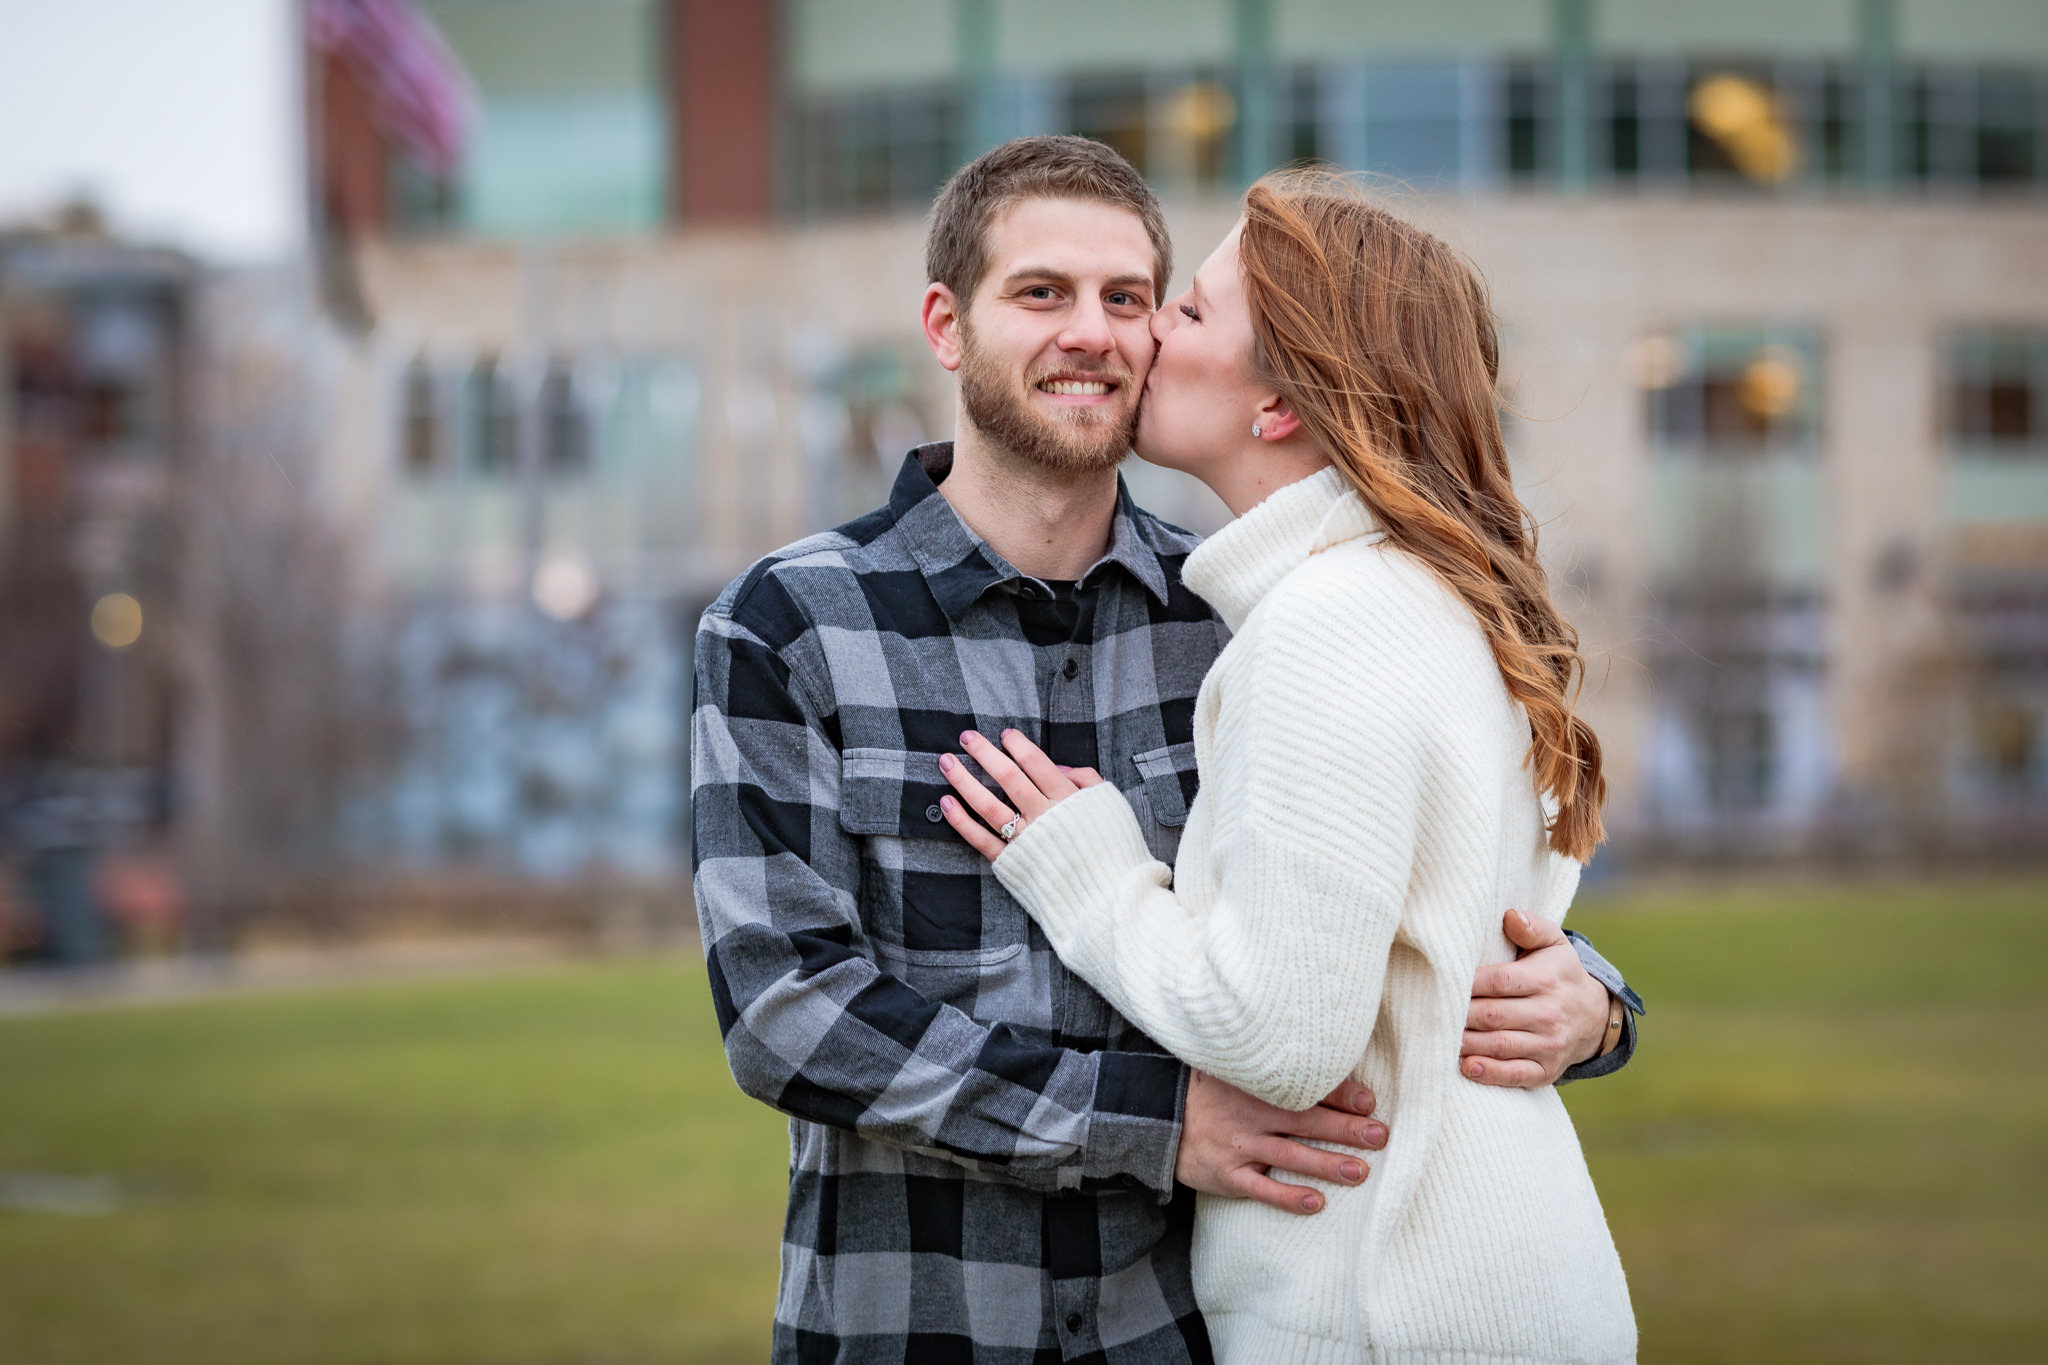 Bride-to-be kisses her fiance's cheek during a North Shore engagement session in Pittsburgh, PA